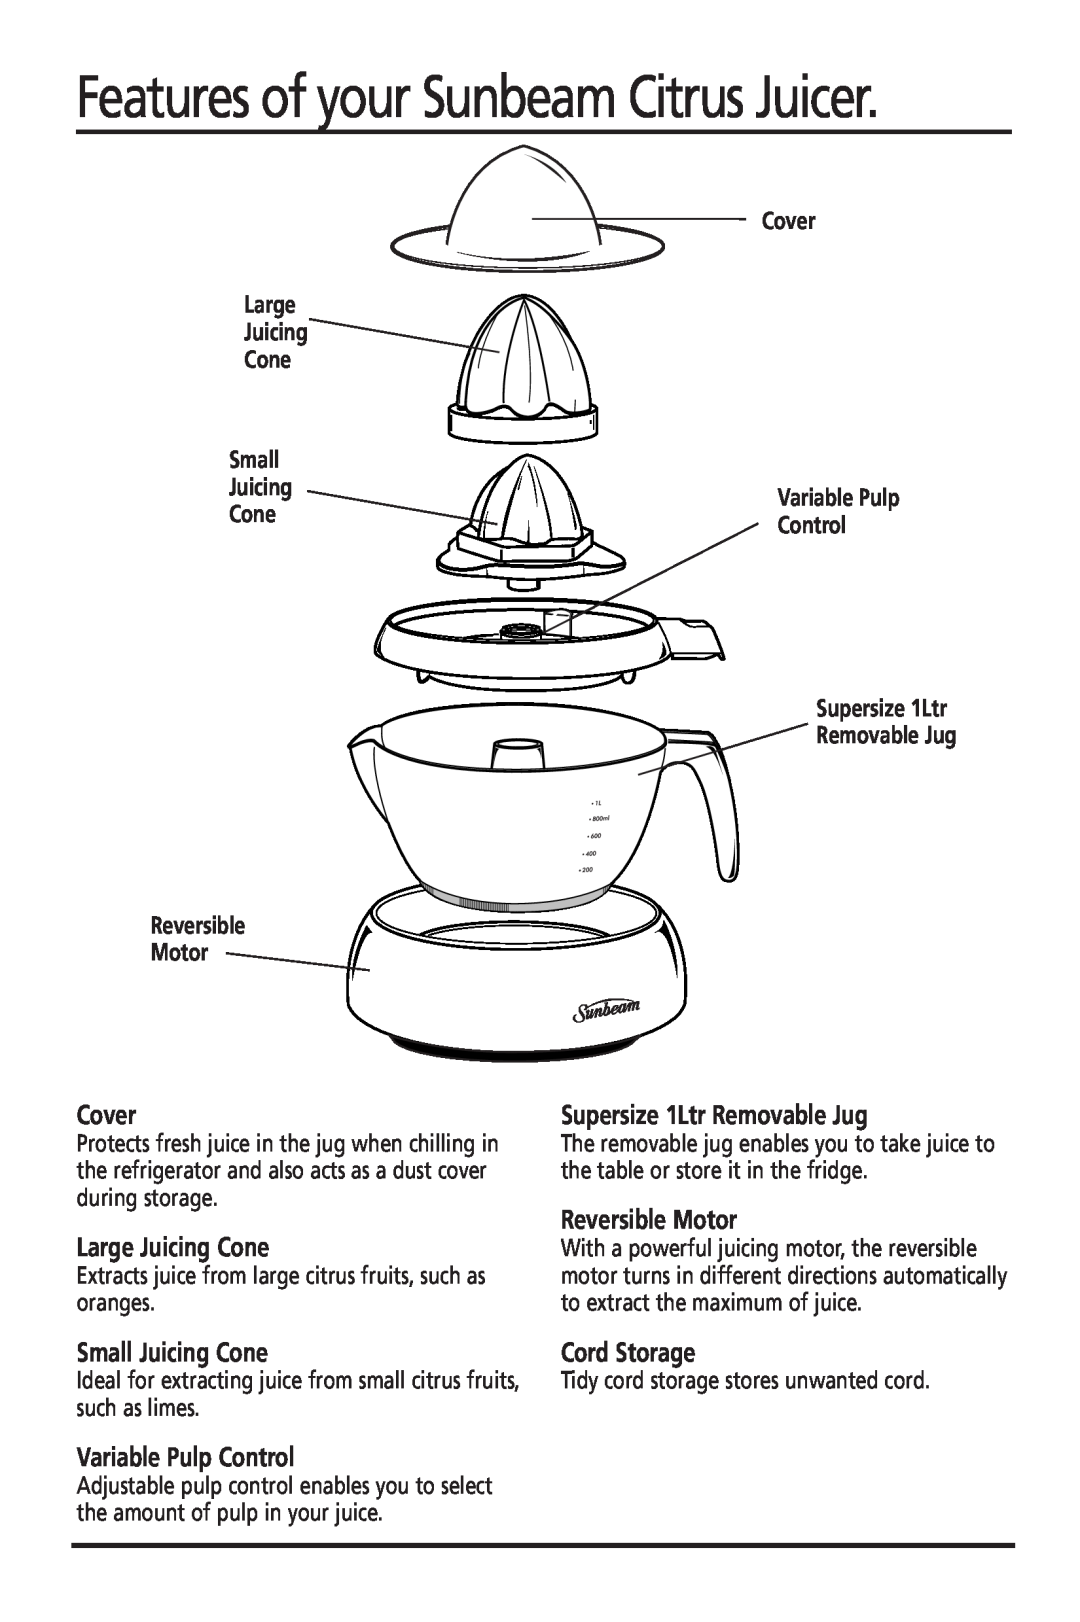 Sunbeam JE2600 Features of your Sunbeam Citrus Juicer, Cover, Large Juicing Cone, Reversible Motor, Small Juicing Cone 